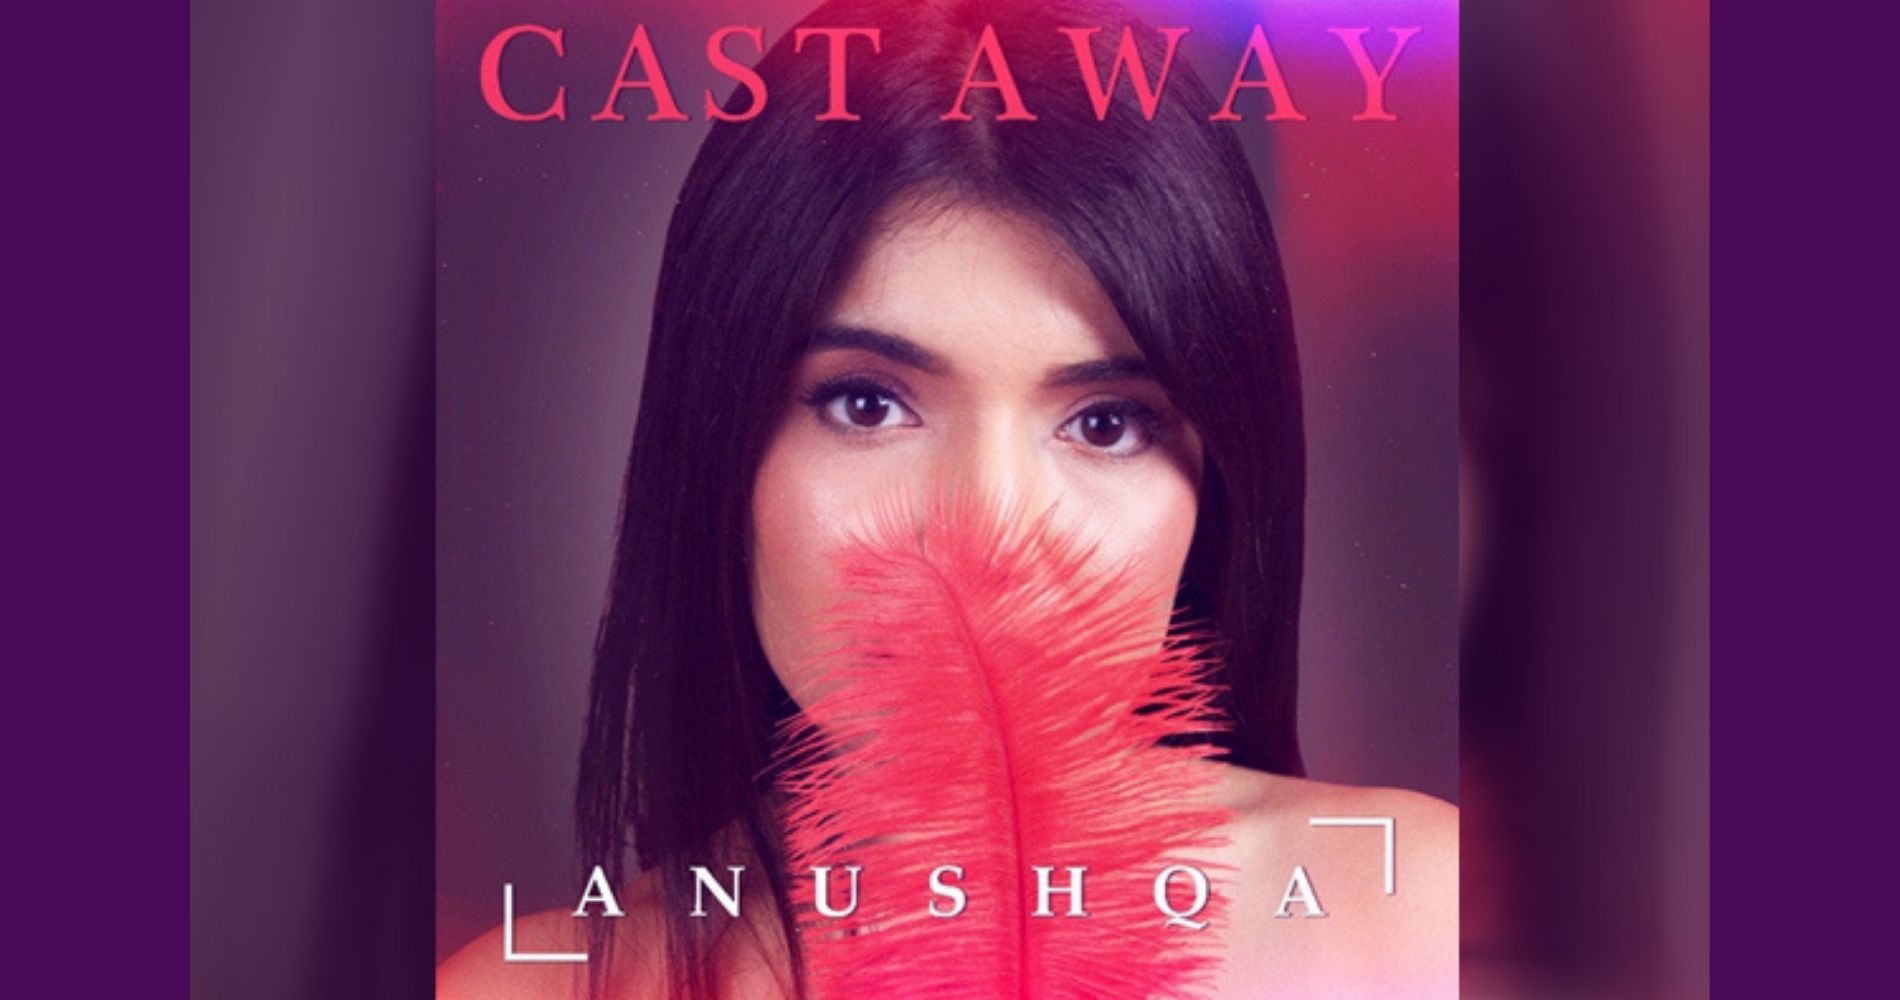 Universal Music India releases “Cast Away” an English groovy love song by Anushqa